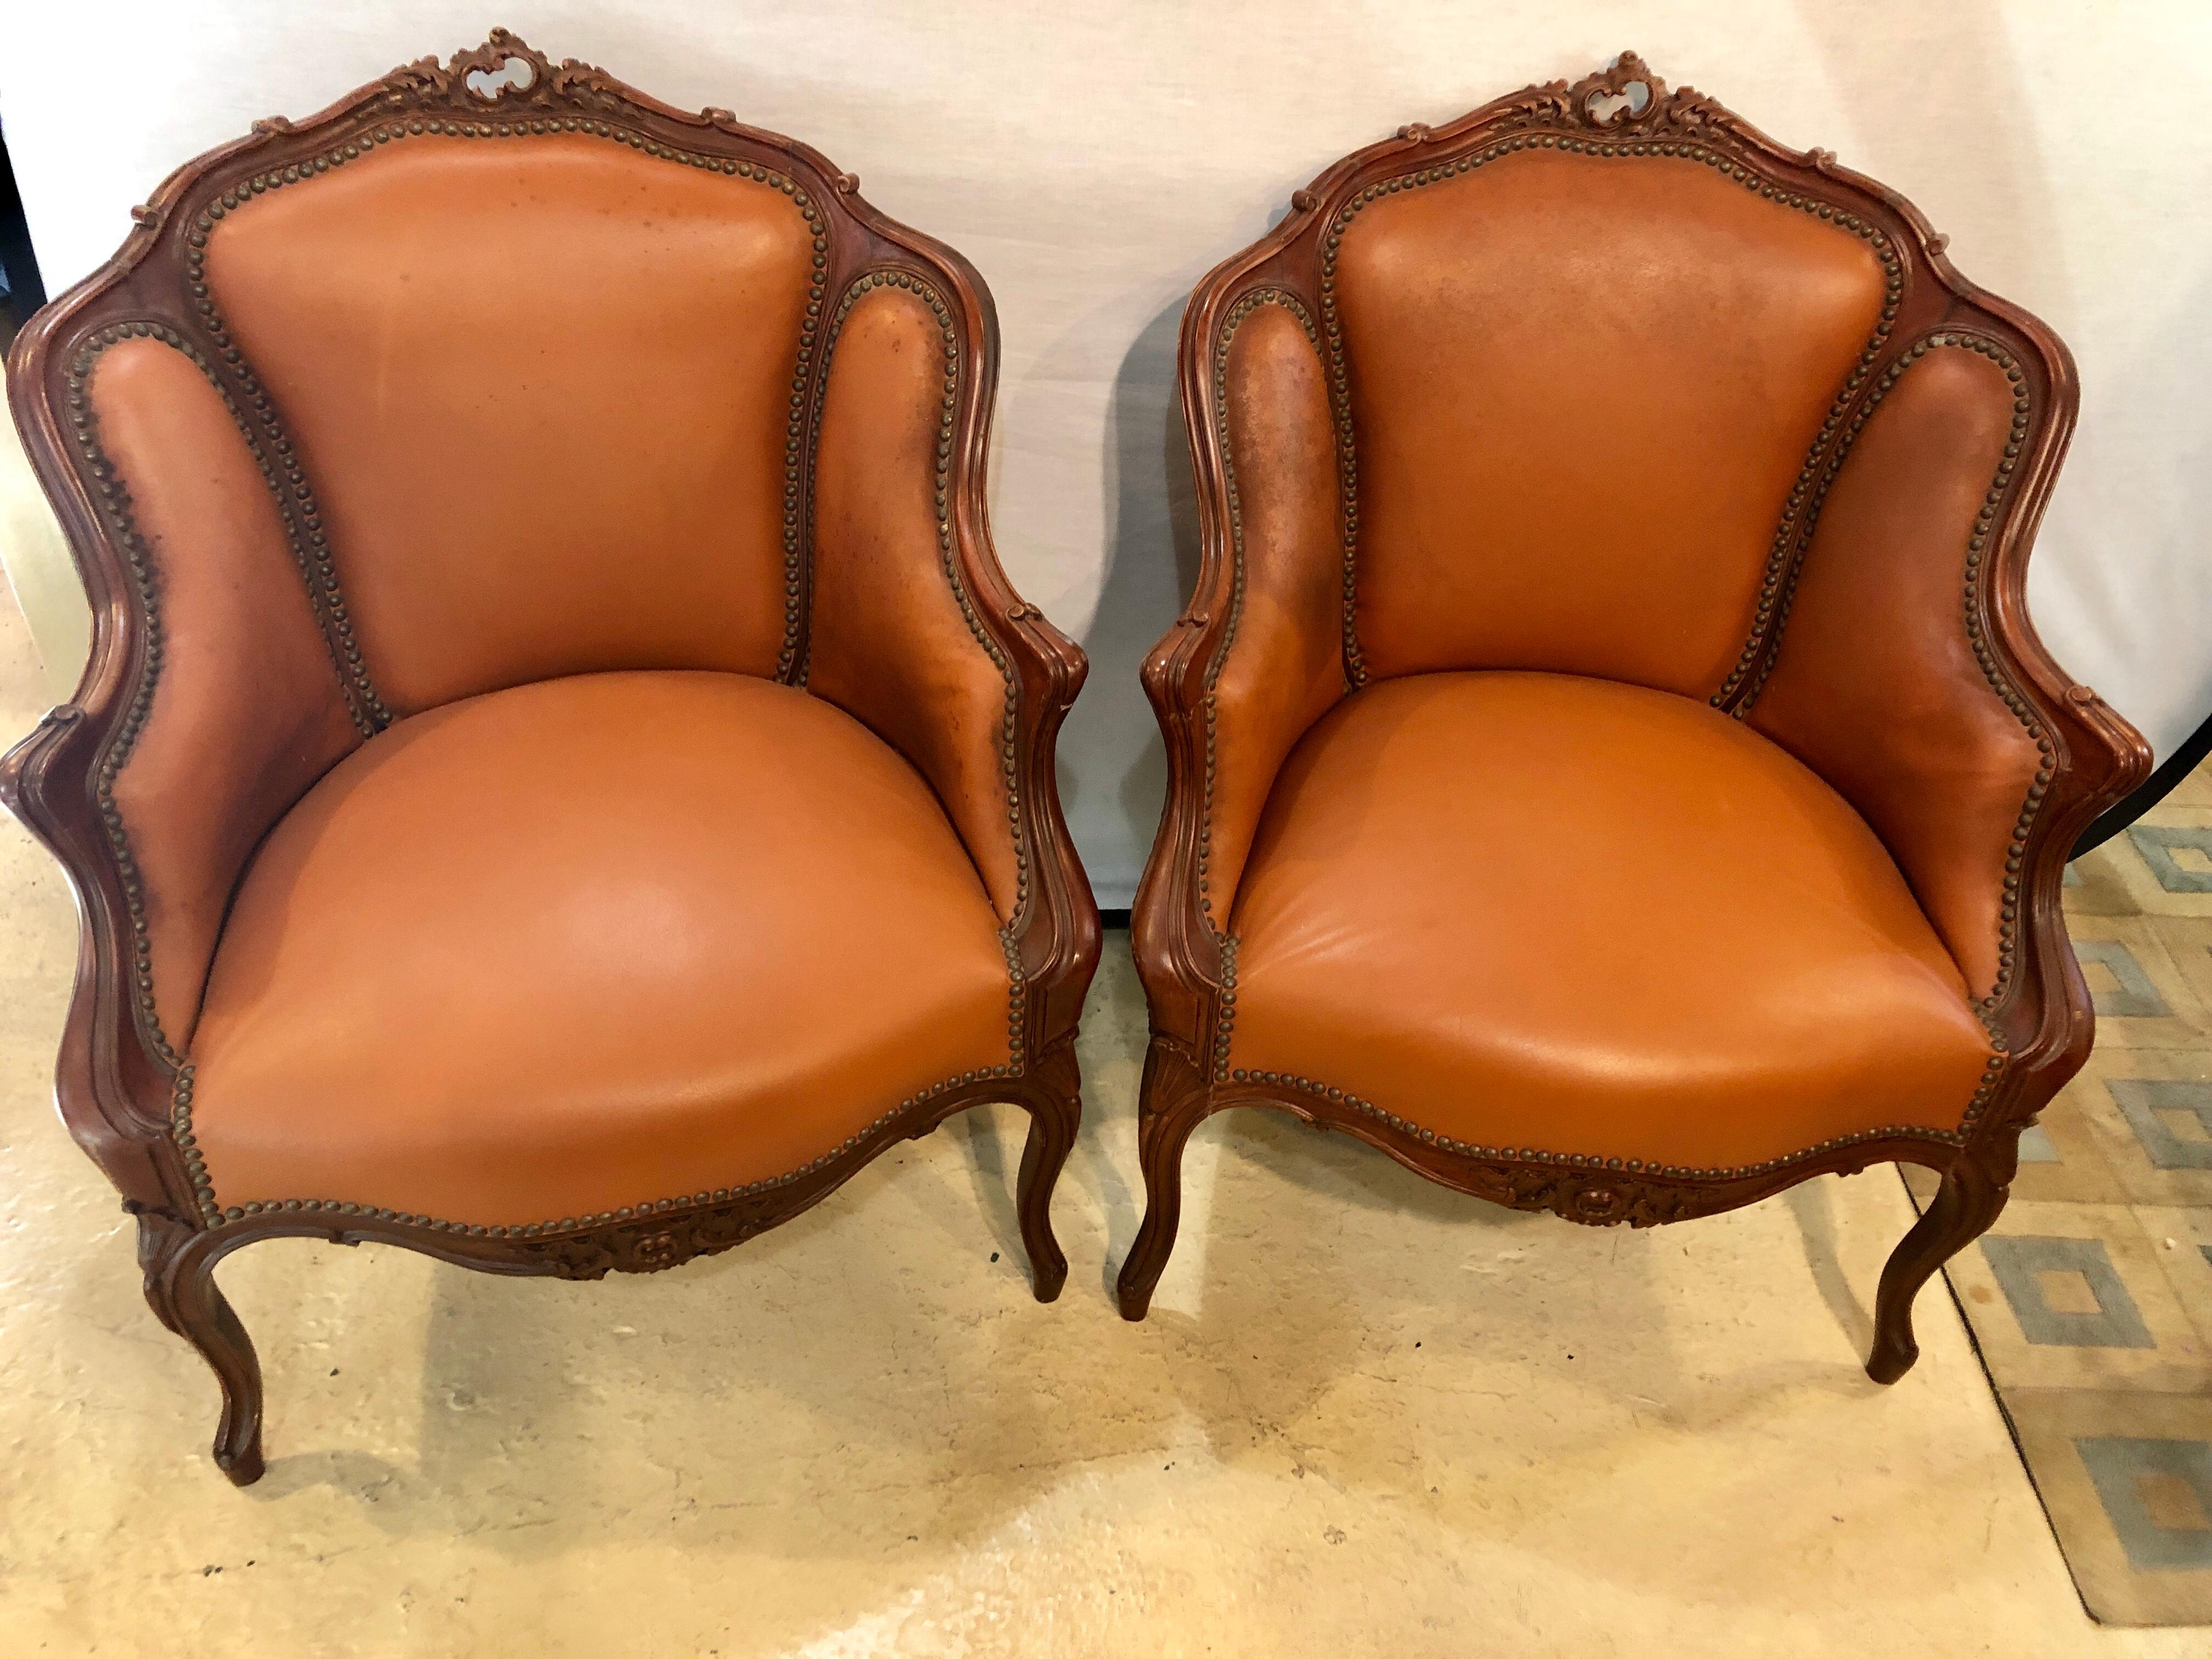 Pair of early 1920s Louis XV style barrel back bergere armchairs. Each in a worn tacked leather upholstery with stuffed sides, back and seats. The finely carved frames in a walnut finish with shell carvings. Upholstery is worn with light stains, no